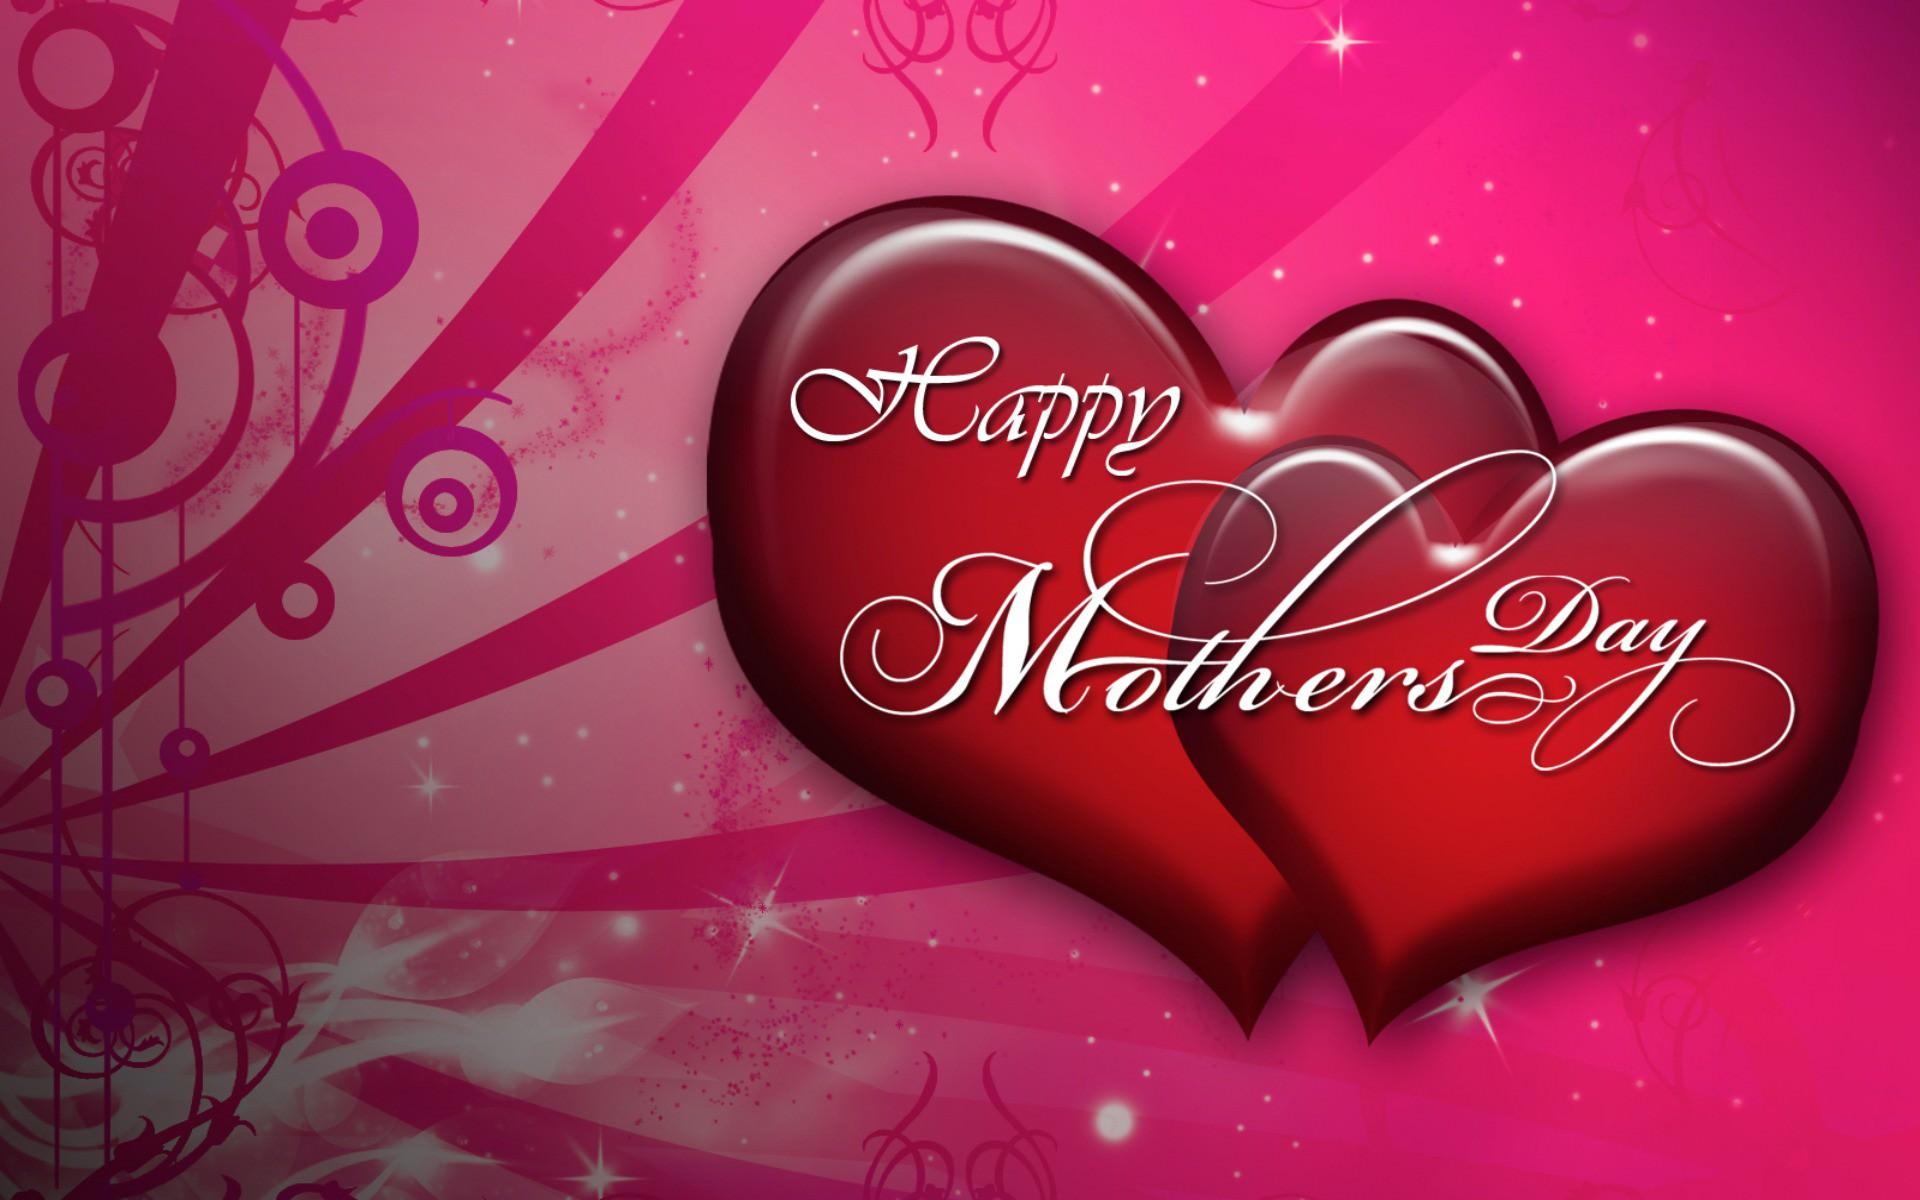 Mothers Day Picture, HD Image, HD Wallpaper and More